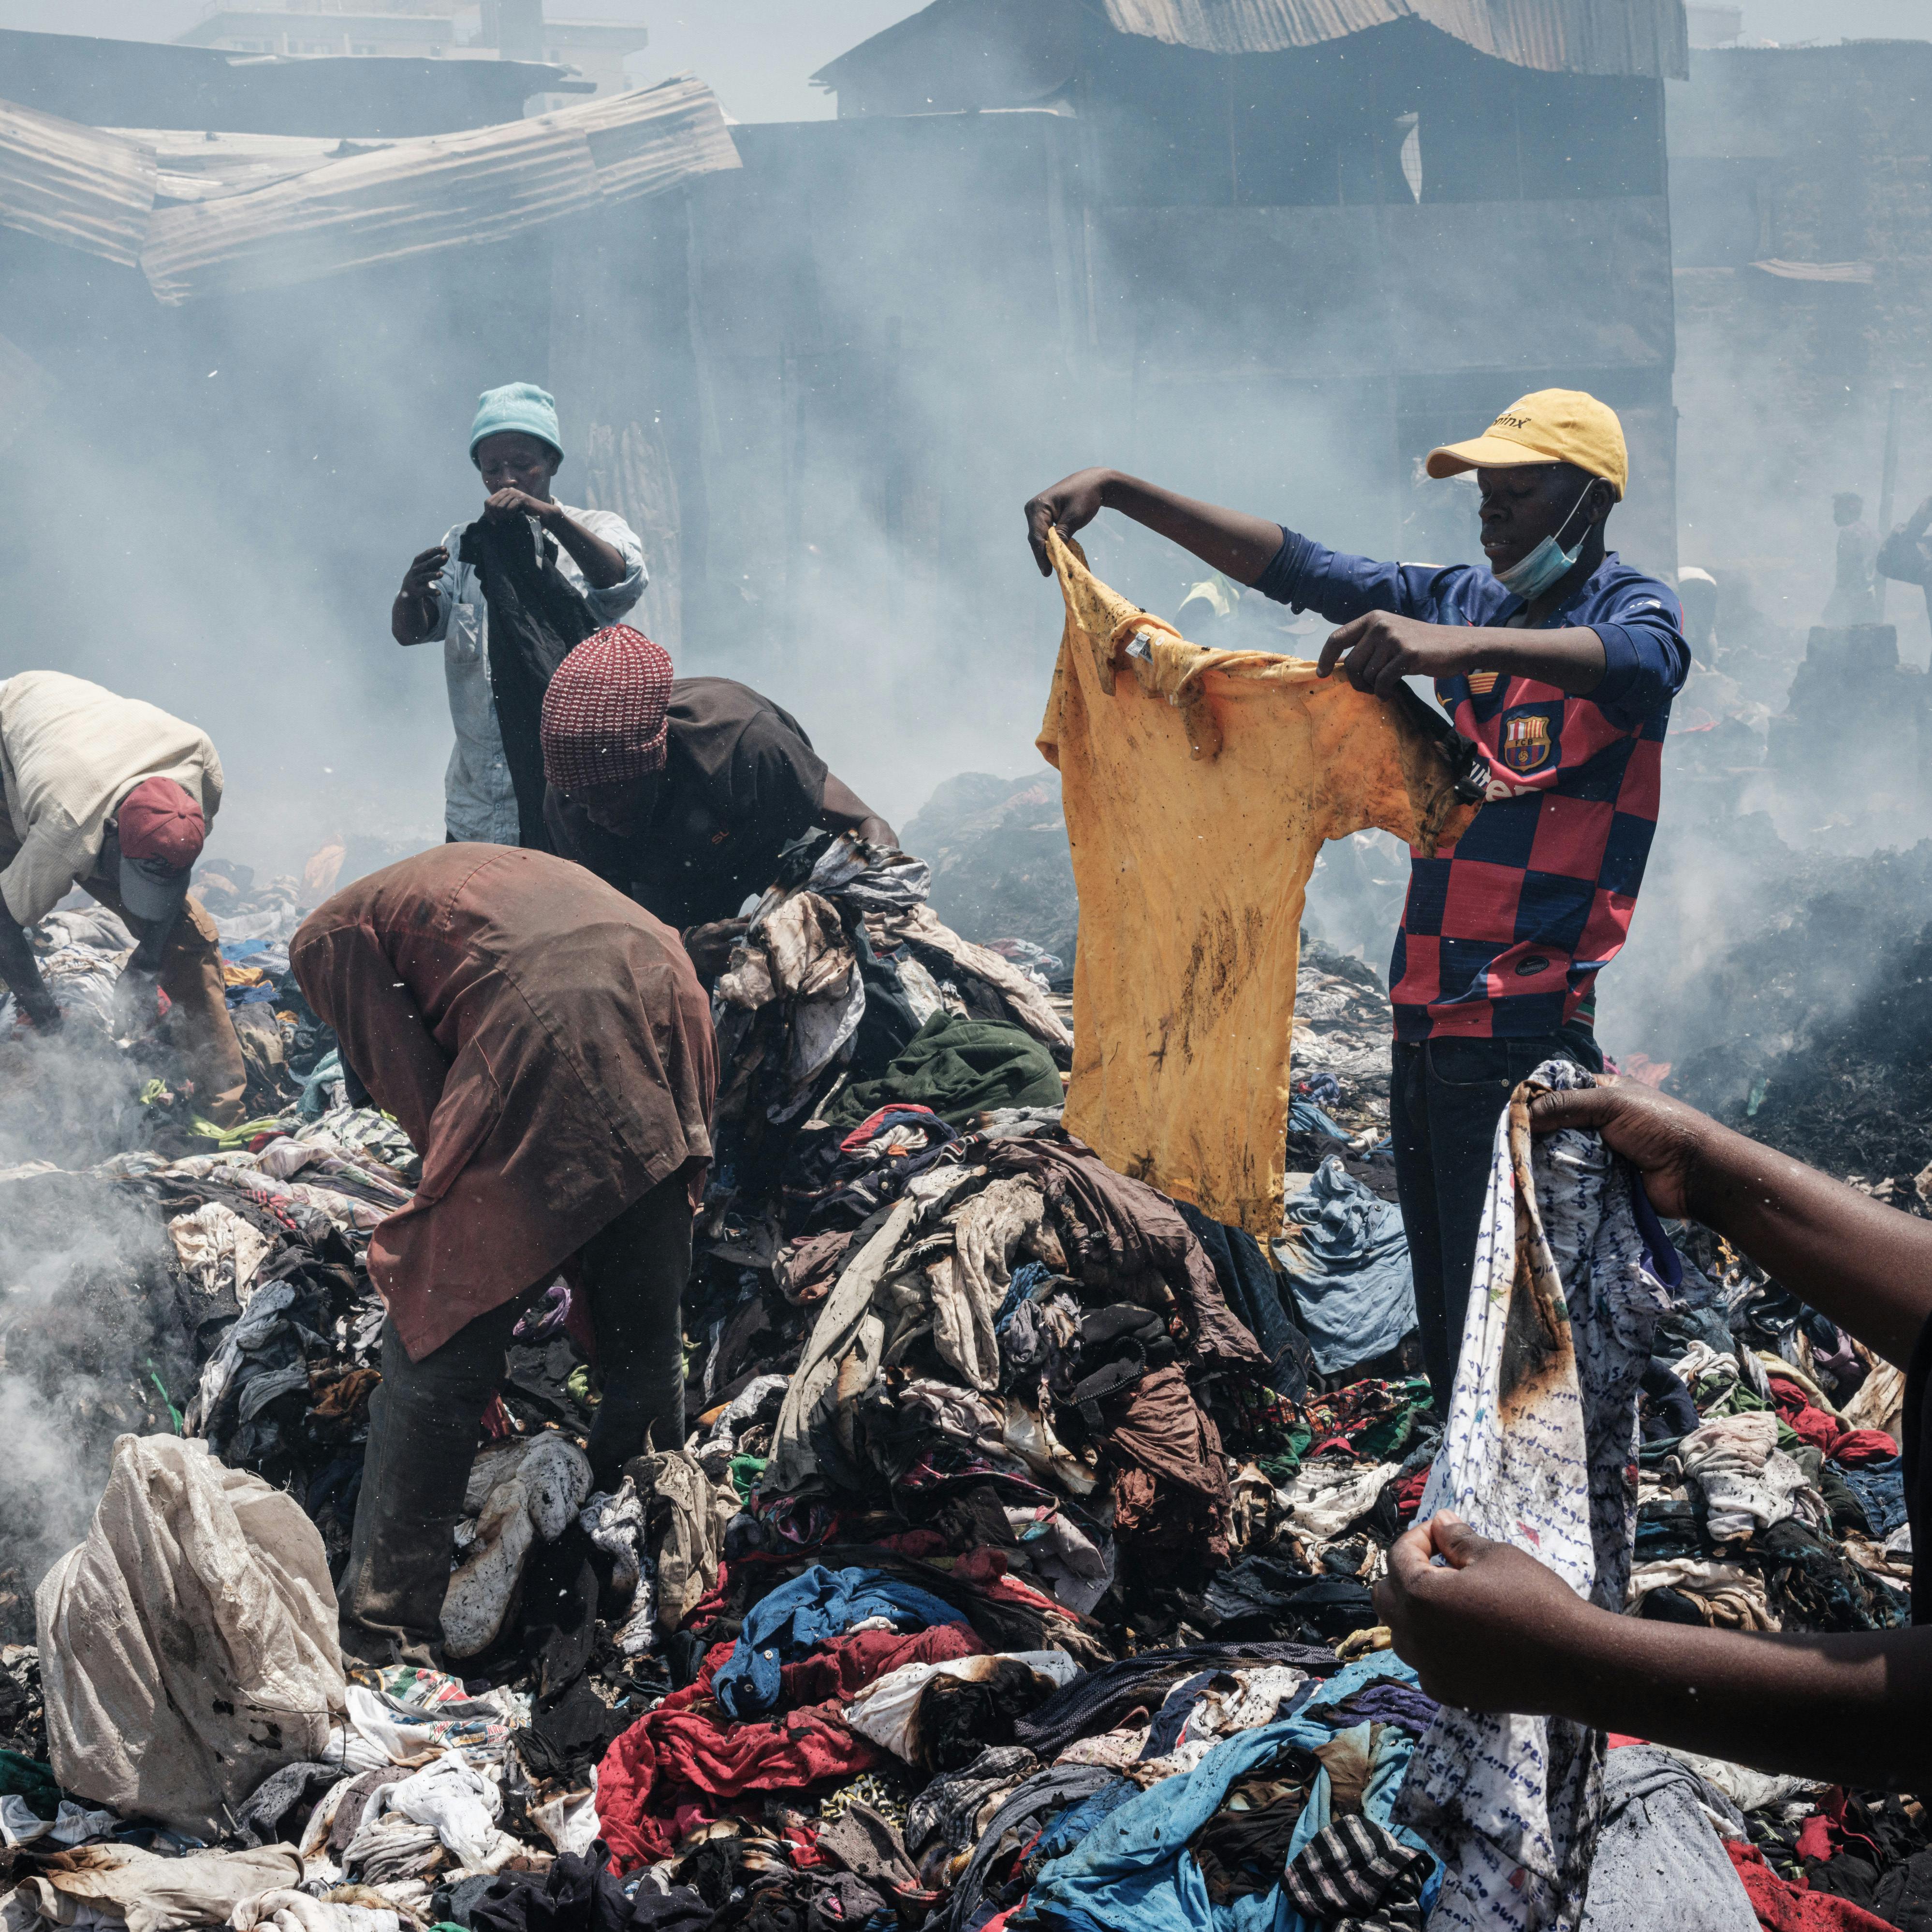 Traders scavenge clothes from debris burnt down by the fire in the early morning at Gikomba market, East Africa's largest second hand clothing market, in Nairobi, Kenya, on November 8, 2021. A court has ordered a part of the market to be evicted to build a health centre but many traders are against the decision, according to residents. Yasuyoshi CHIBA / AFP